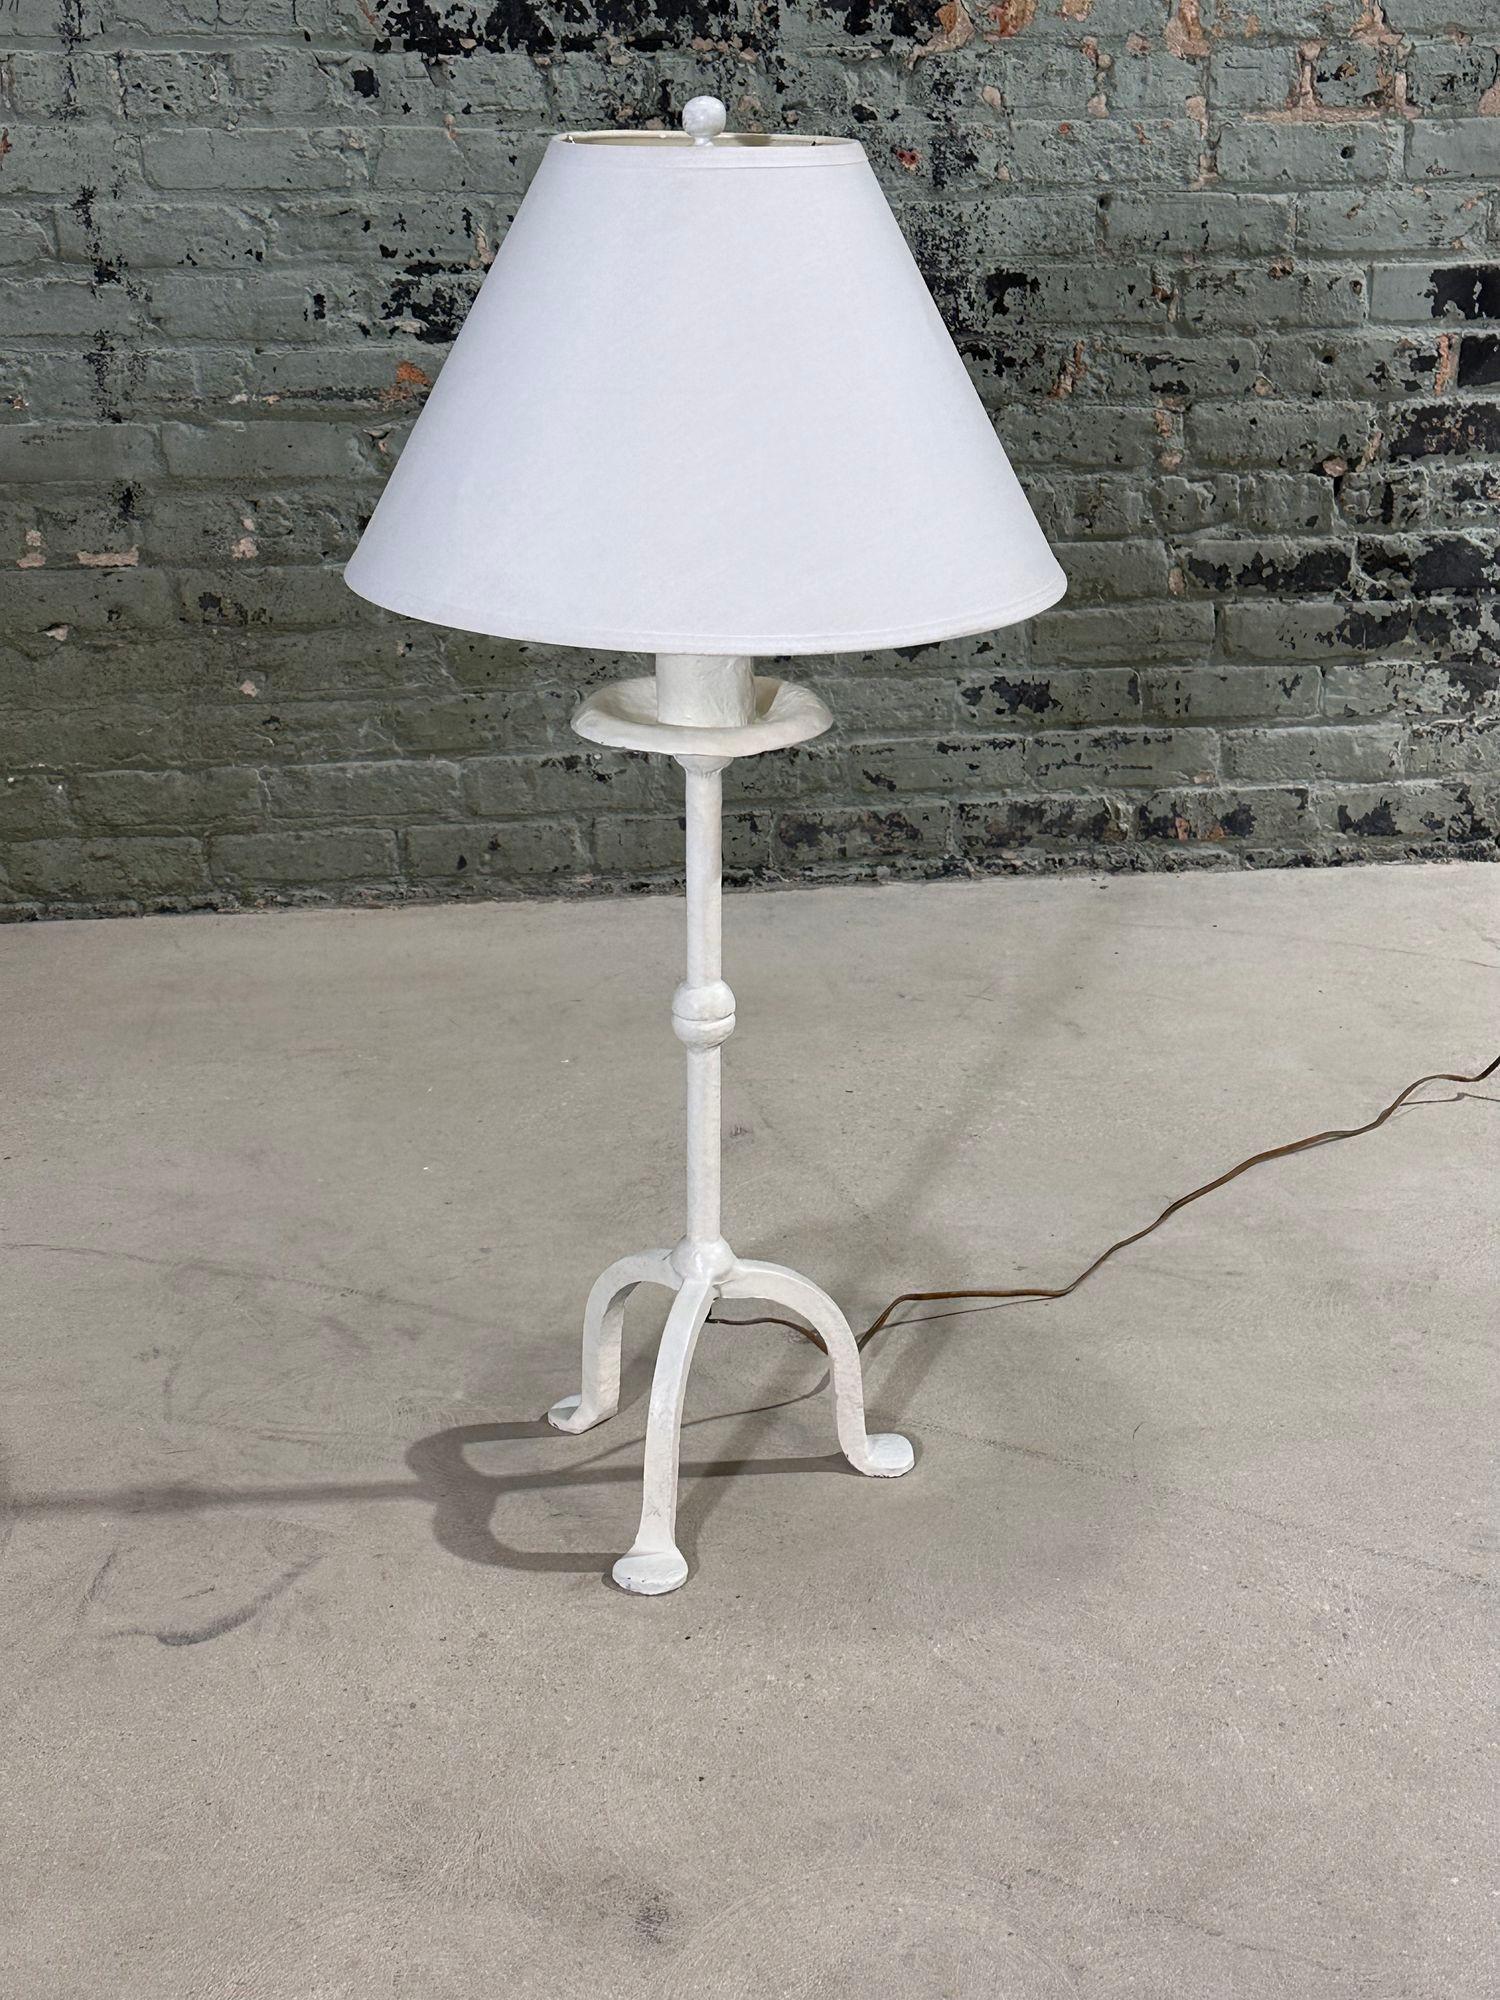 Giacometti Style Plaster Table Lamp, 1960. Giacometti style lamp is made of plaster over iron. Original
FREE shipping anywhere in the United States.